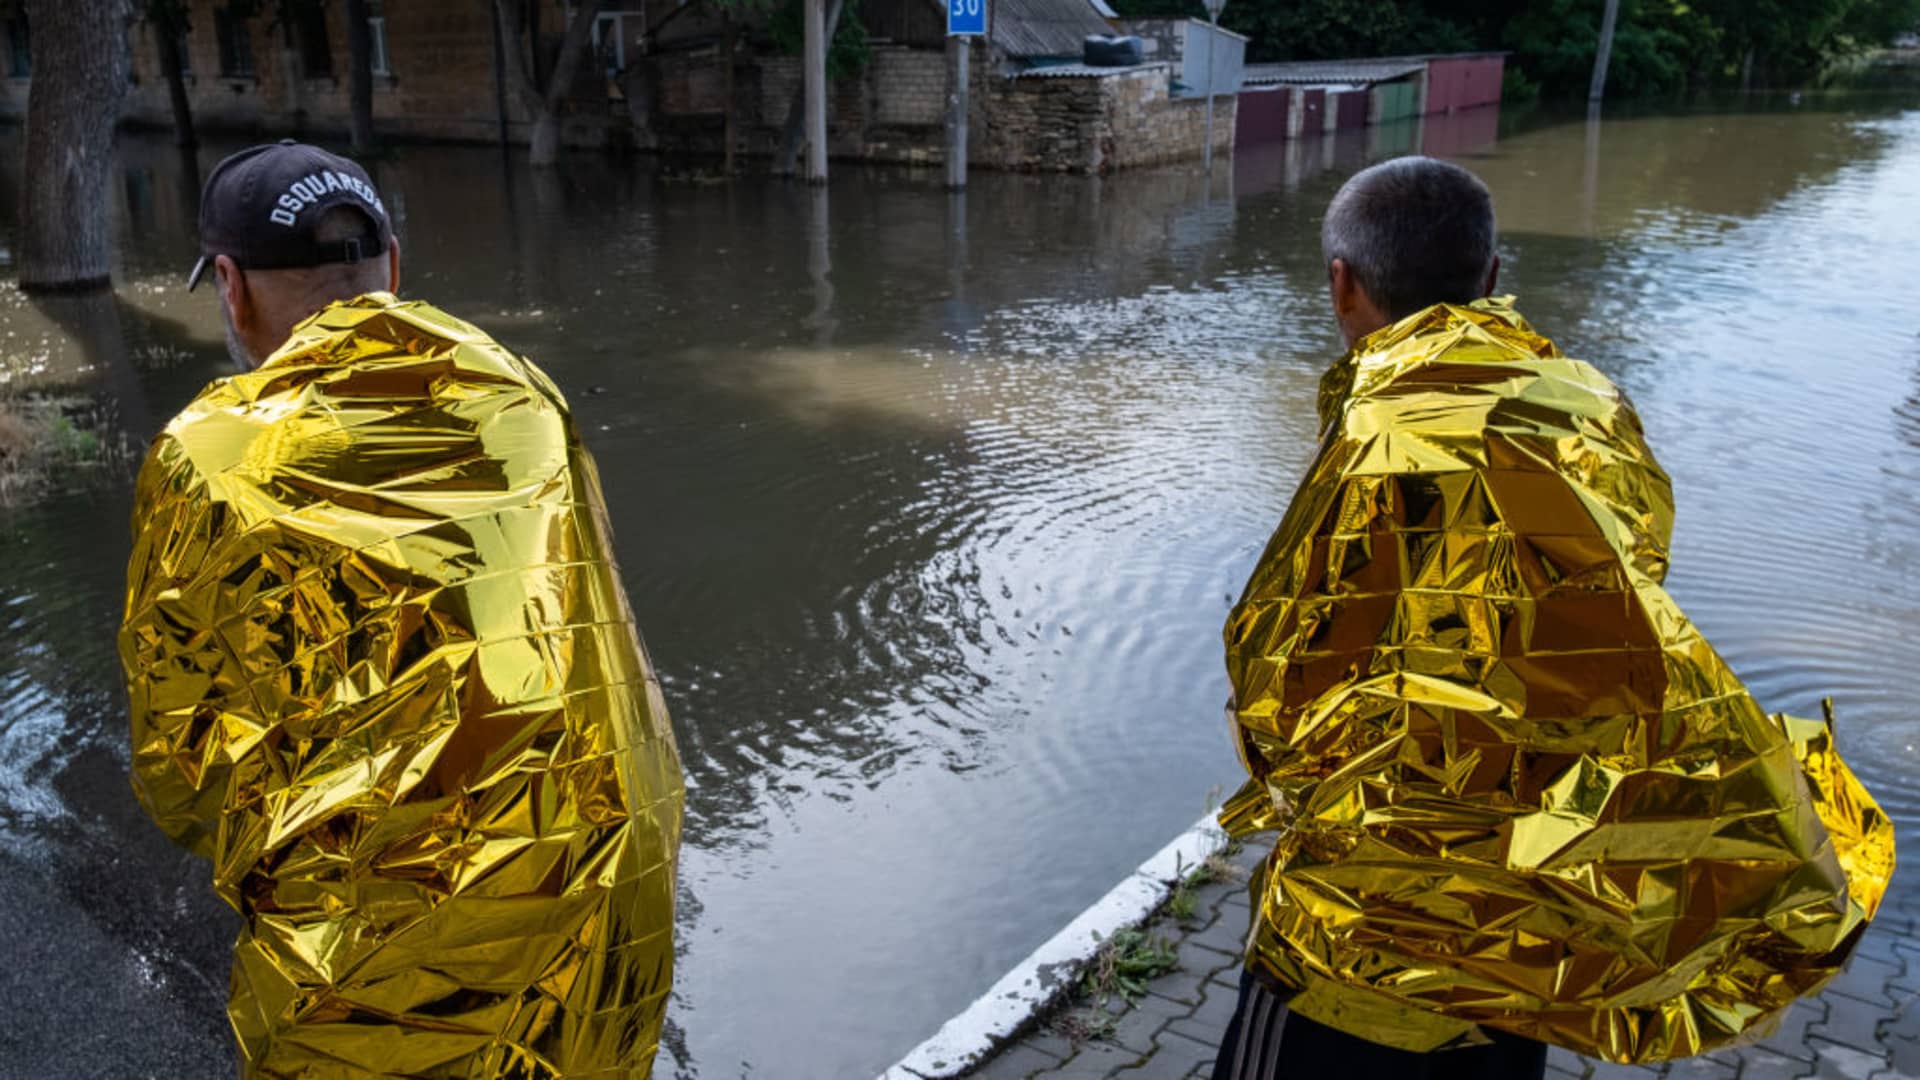 Residents of Kherson wear warming blankets after the explosion at the Kakhovka hydropower plant unleashed floodwaters in Kherson, Ukraine, on June 7, 2023.